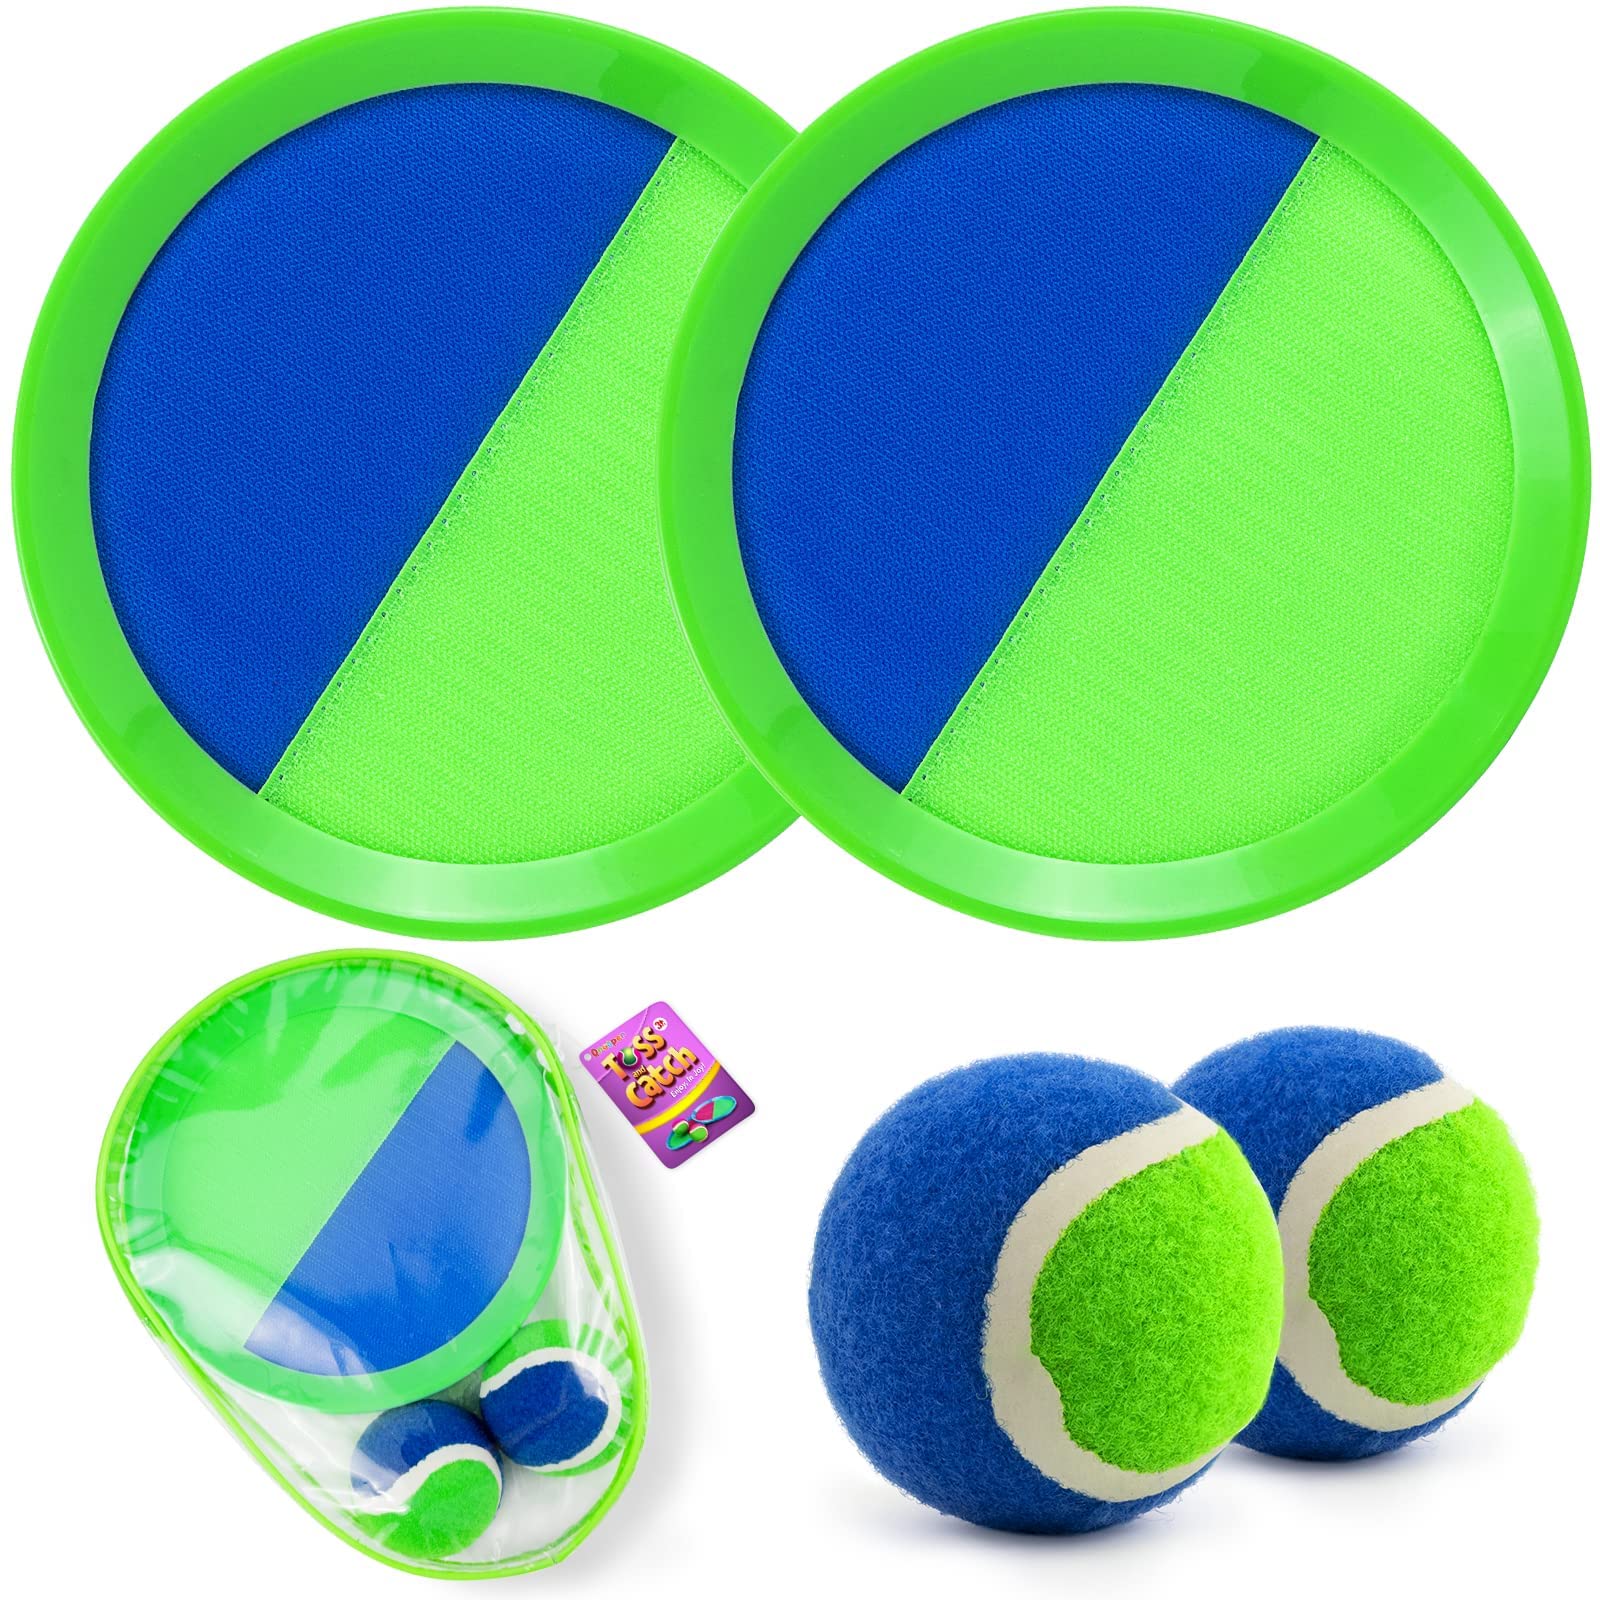 Qrooper Toss and Catch Ball Set Kids Toys, Beach Toys, Yard Games